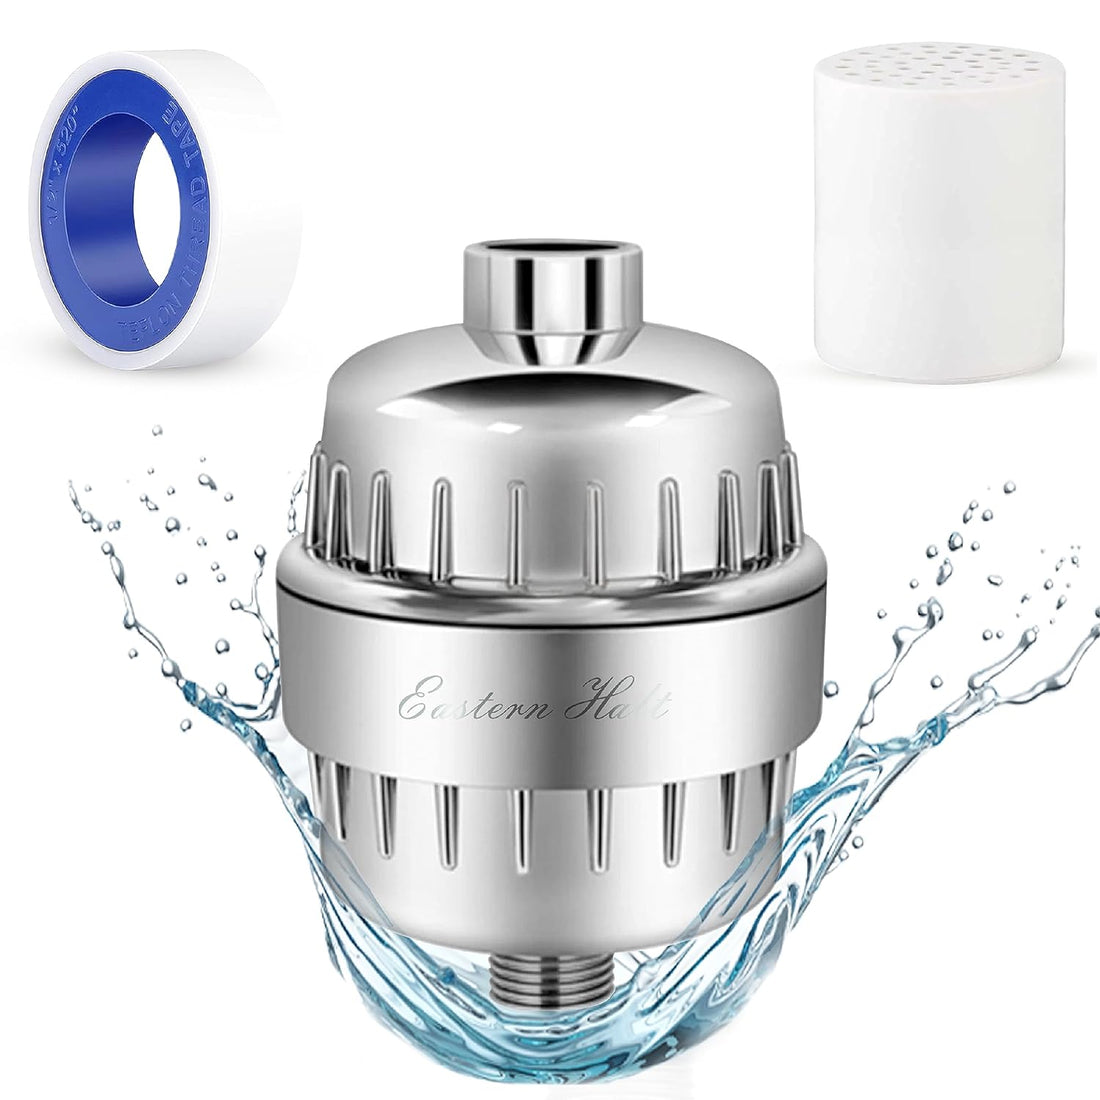 Eastern Halt - 15 Stage High Output Shower Filter for Hard Water, Water Softener to Reduce Itchy Skin, Dandruff, Removes Chlorine and Fluoride, Harmful Impurities Plus Heavy Metals (Chrome)